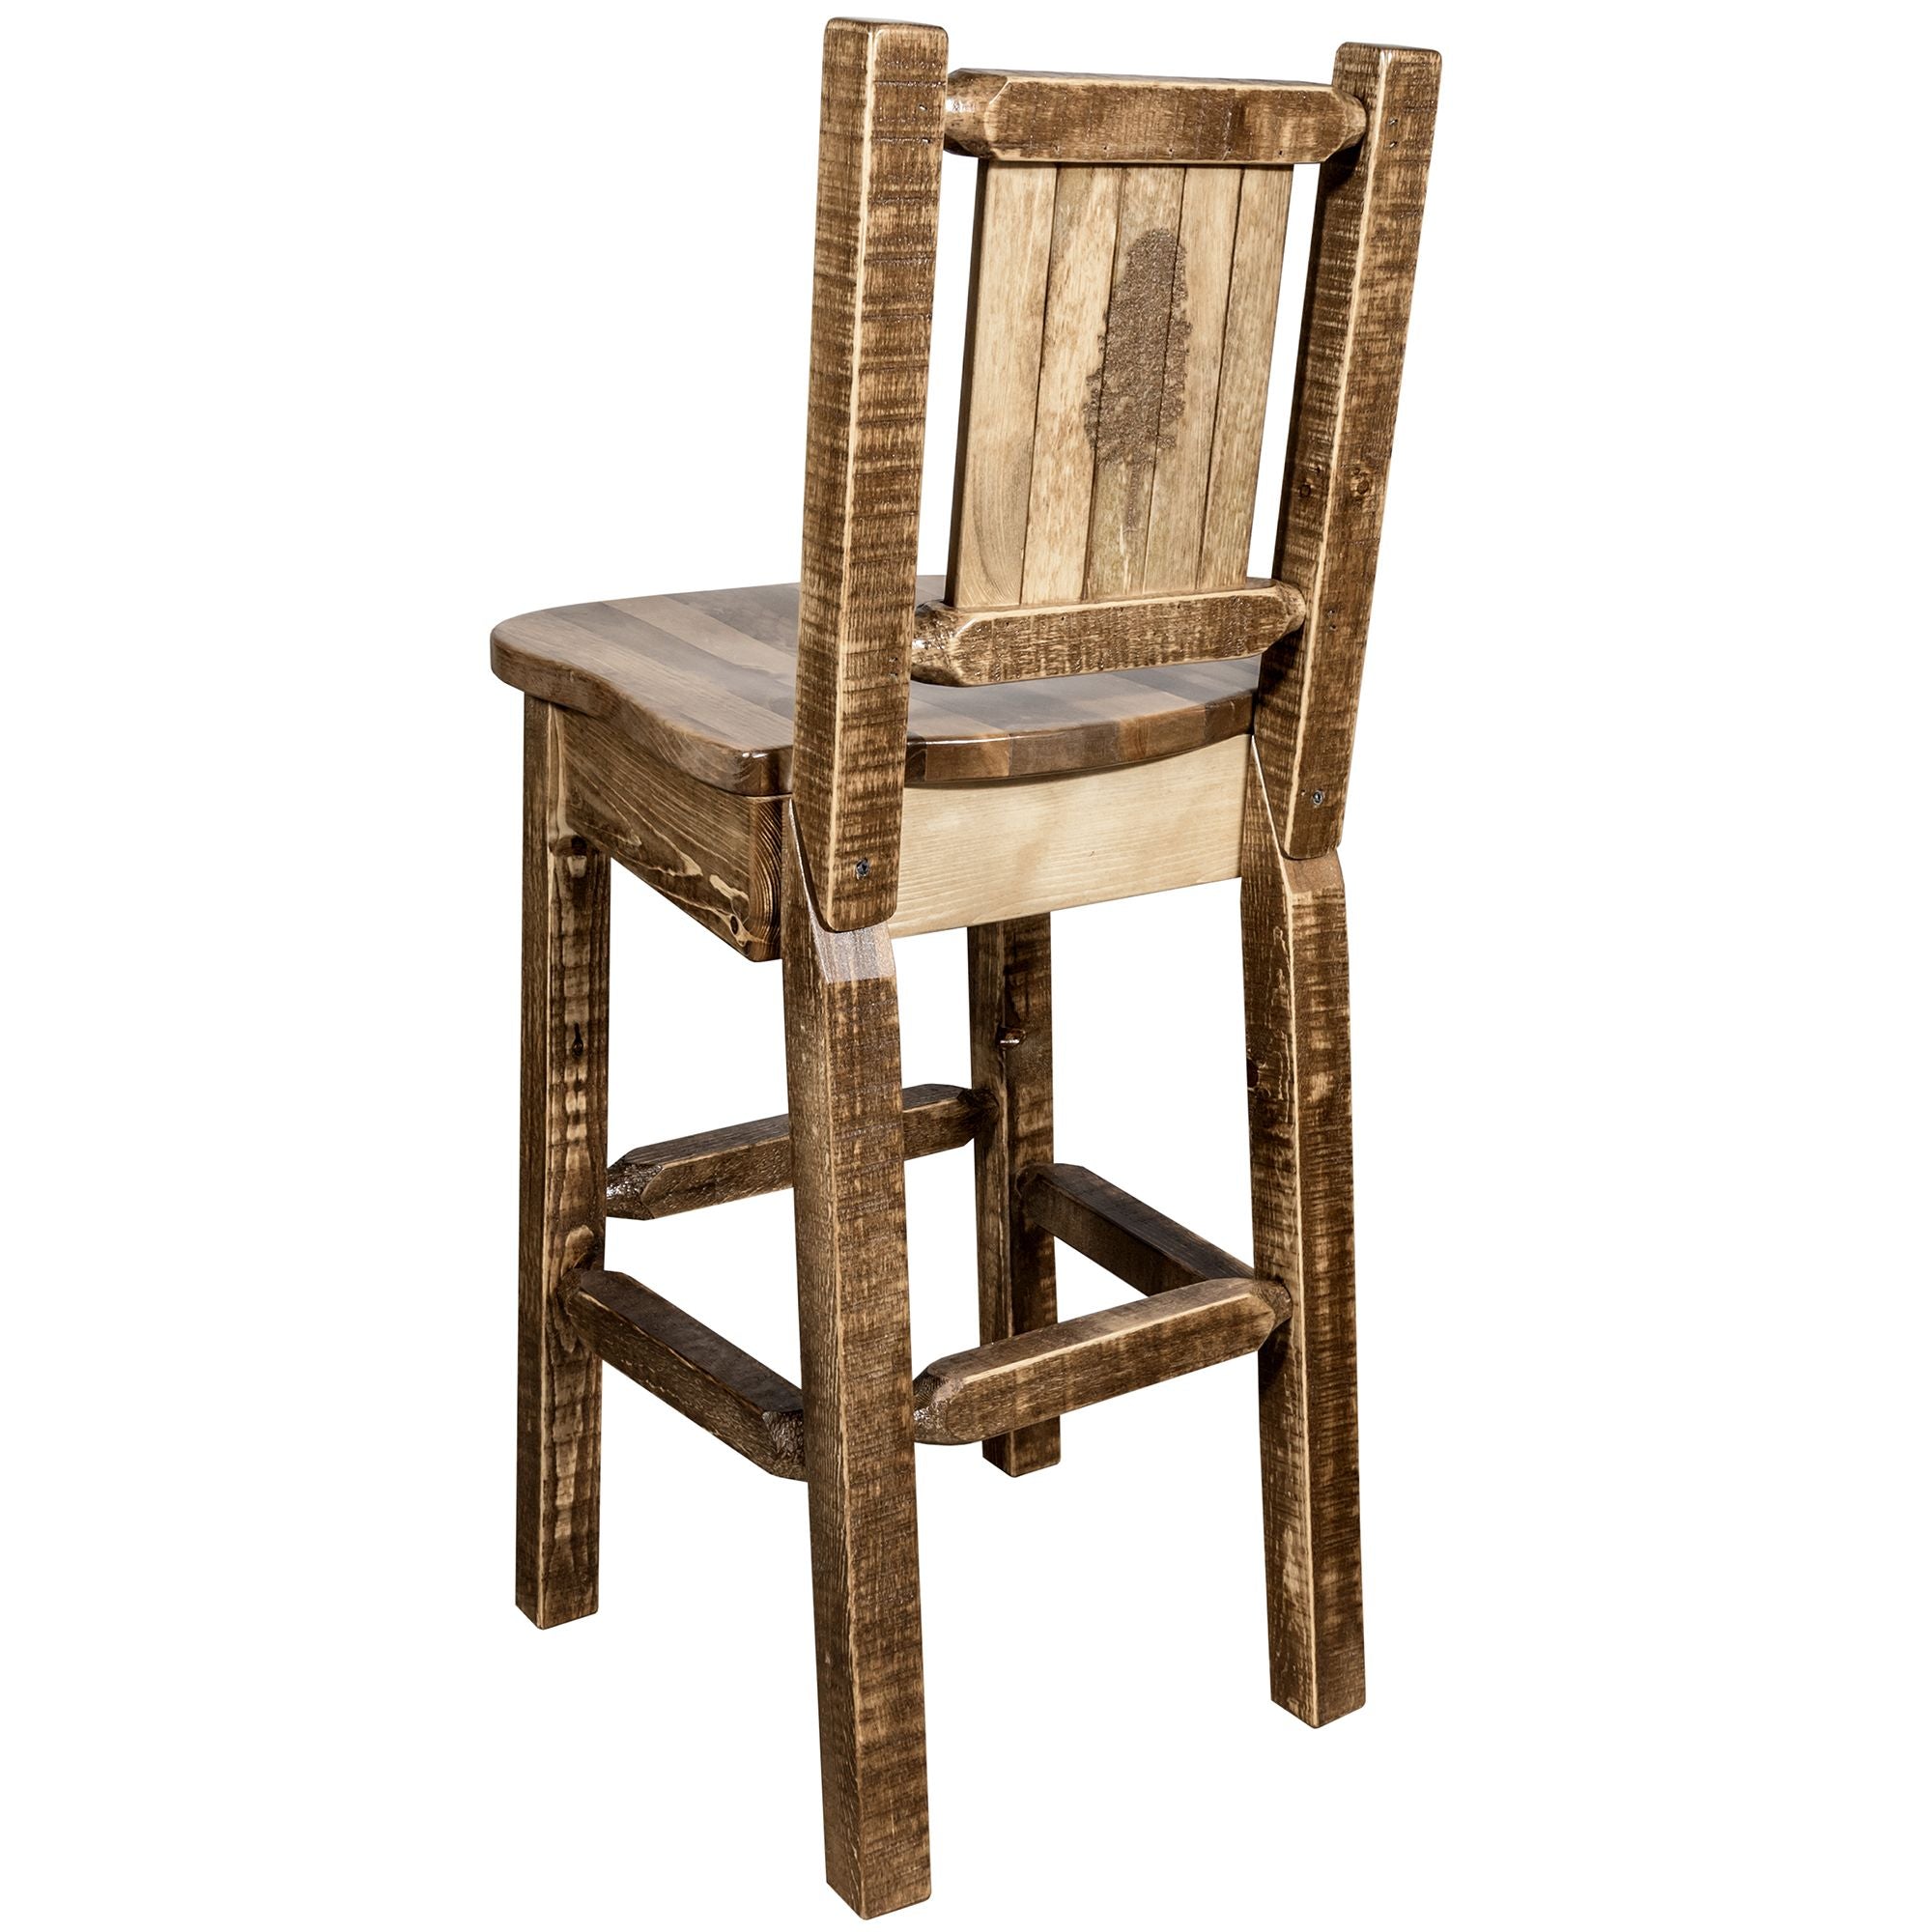 Montana Homestead MWHCBSWNRSLLZPINE Barstool With Back and Laser Engraved Pine Tree Design Stain Lacquer Finish